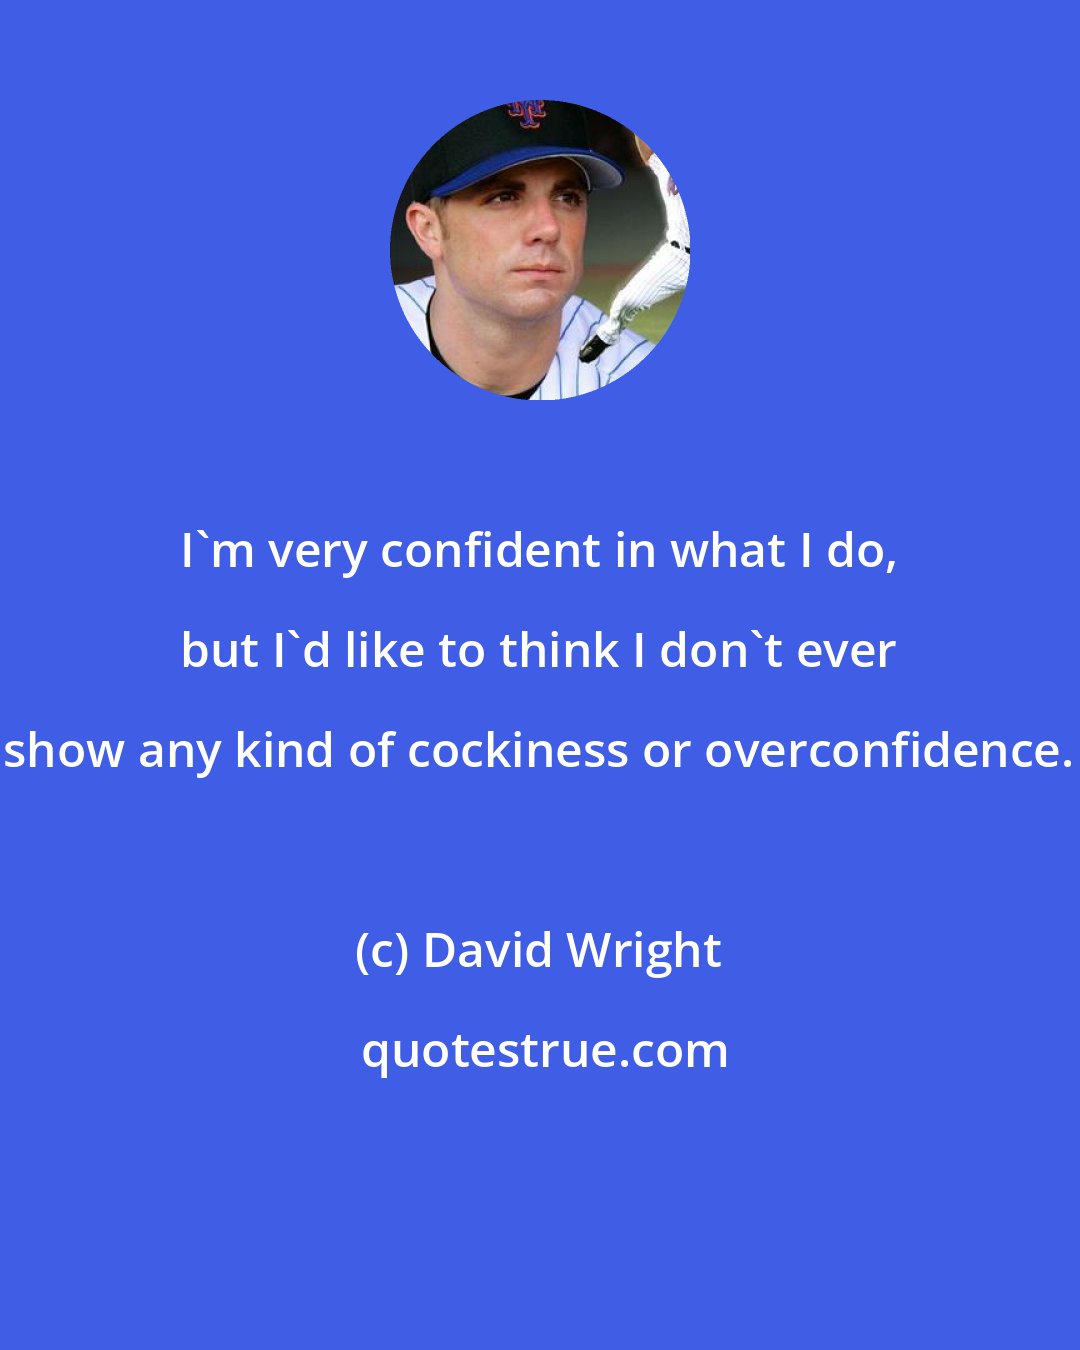 David Wright: I'm very confident in what I do, but I'd like to think I don't ever show any kind of cockiness or overconfidence.